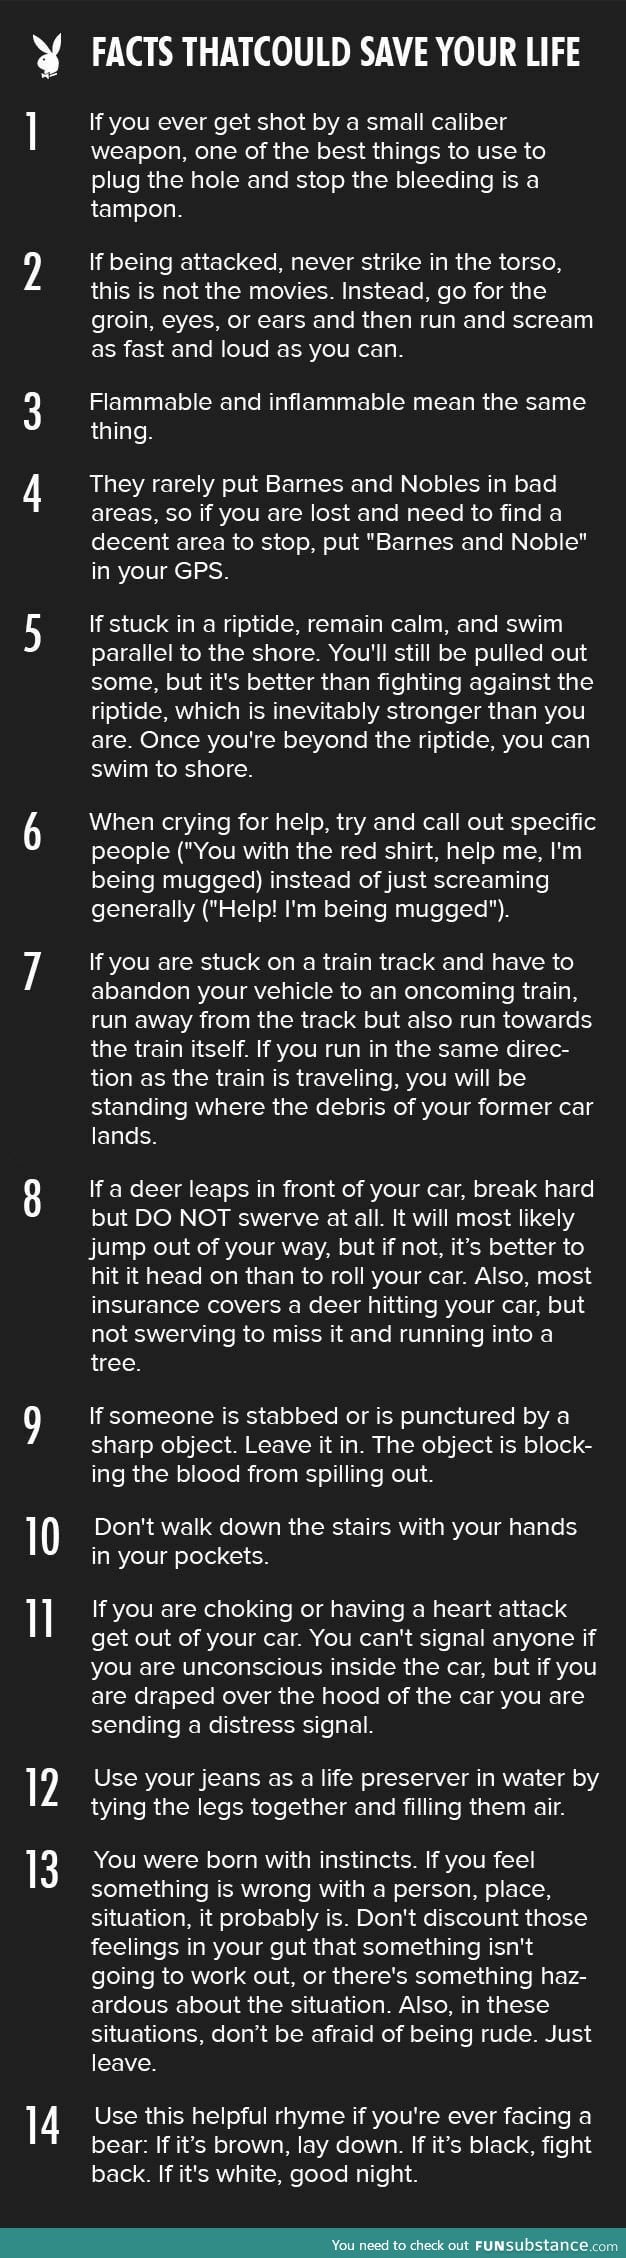 14 tips that could save your life